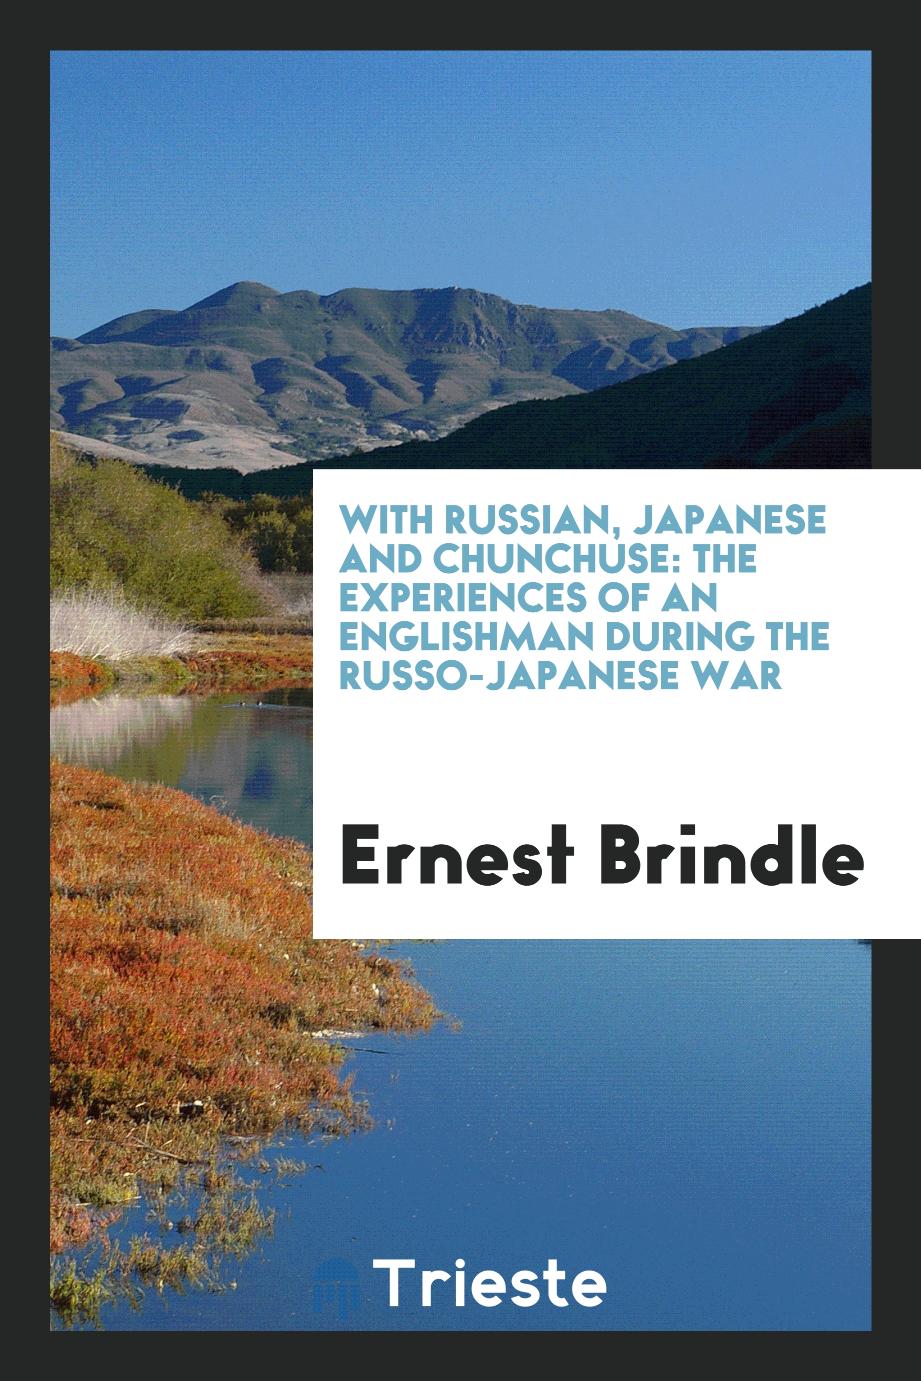 With Russian, Japanese and Chunchuse: the experiences of an Englishman during the Russo-Japanese War